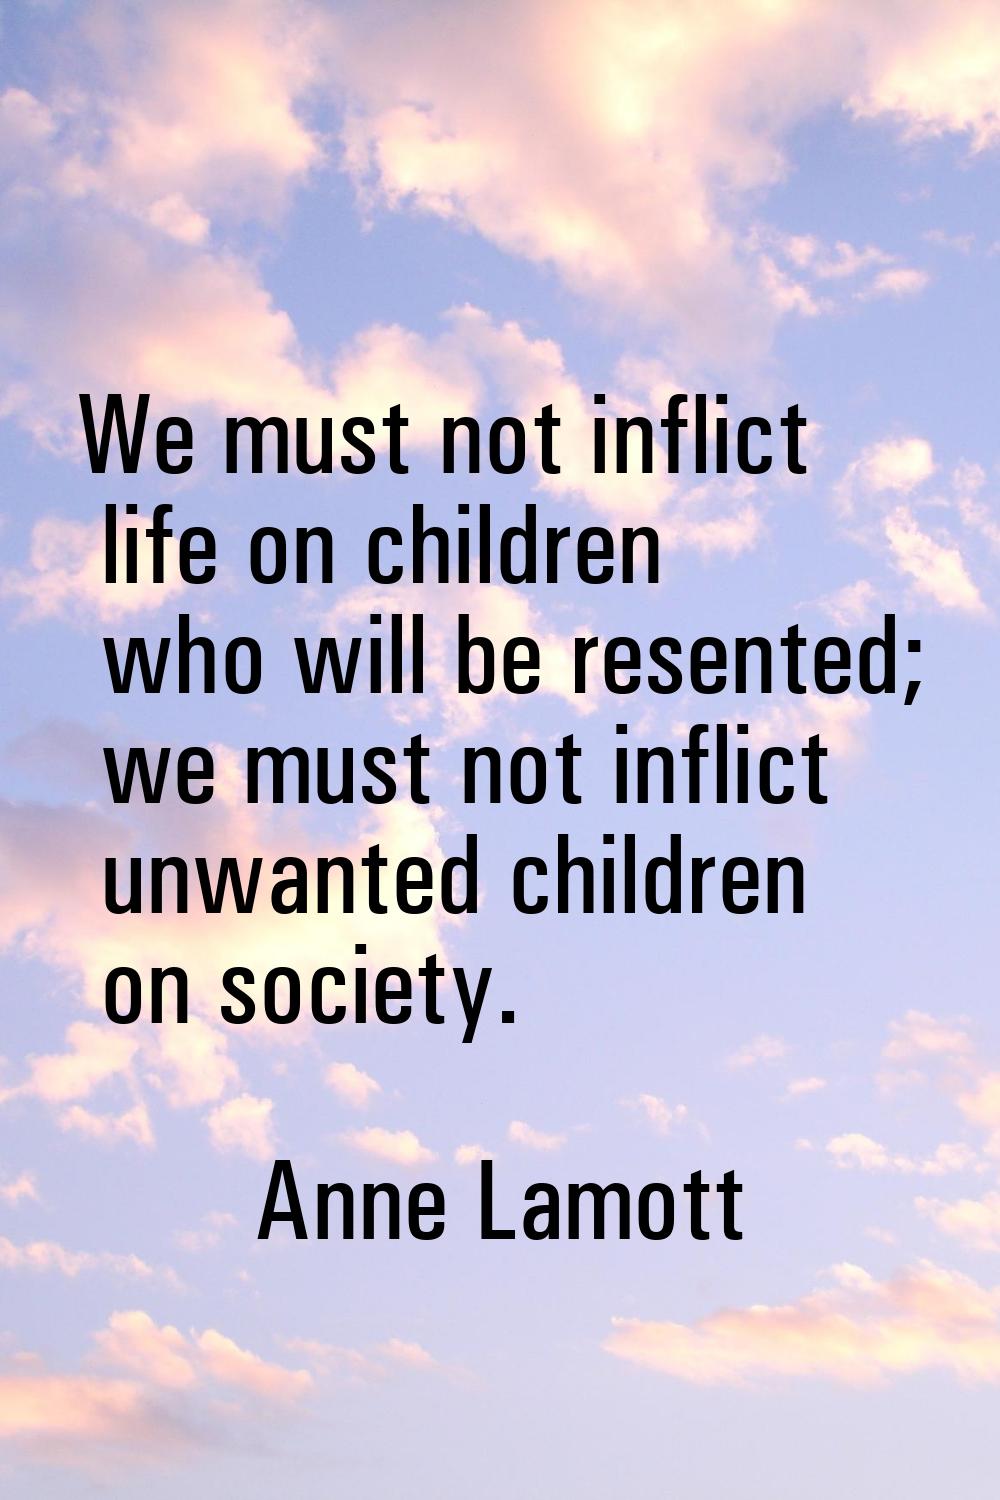 We must not inflict life on children who will be resented; we must not inflict unwanted children on